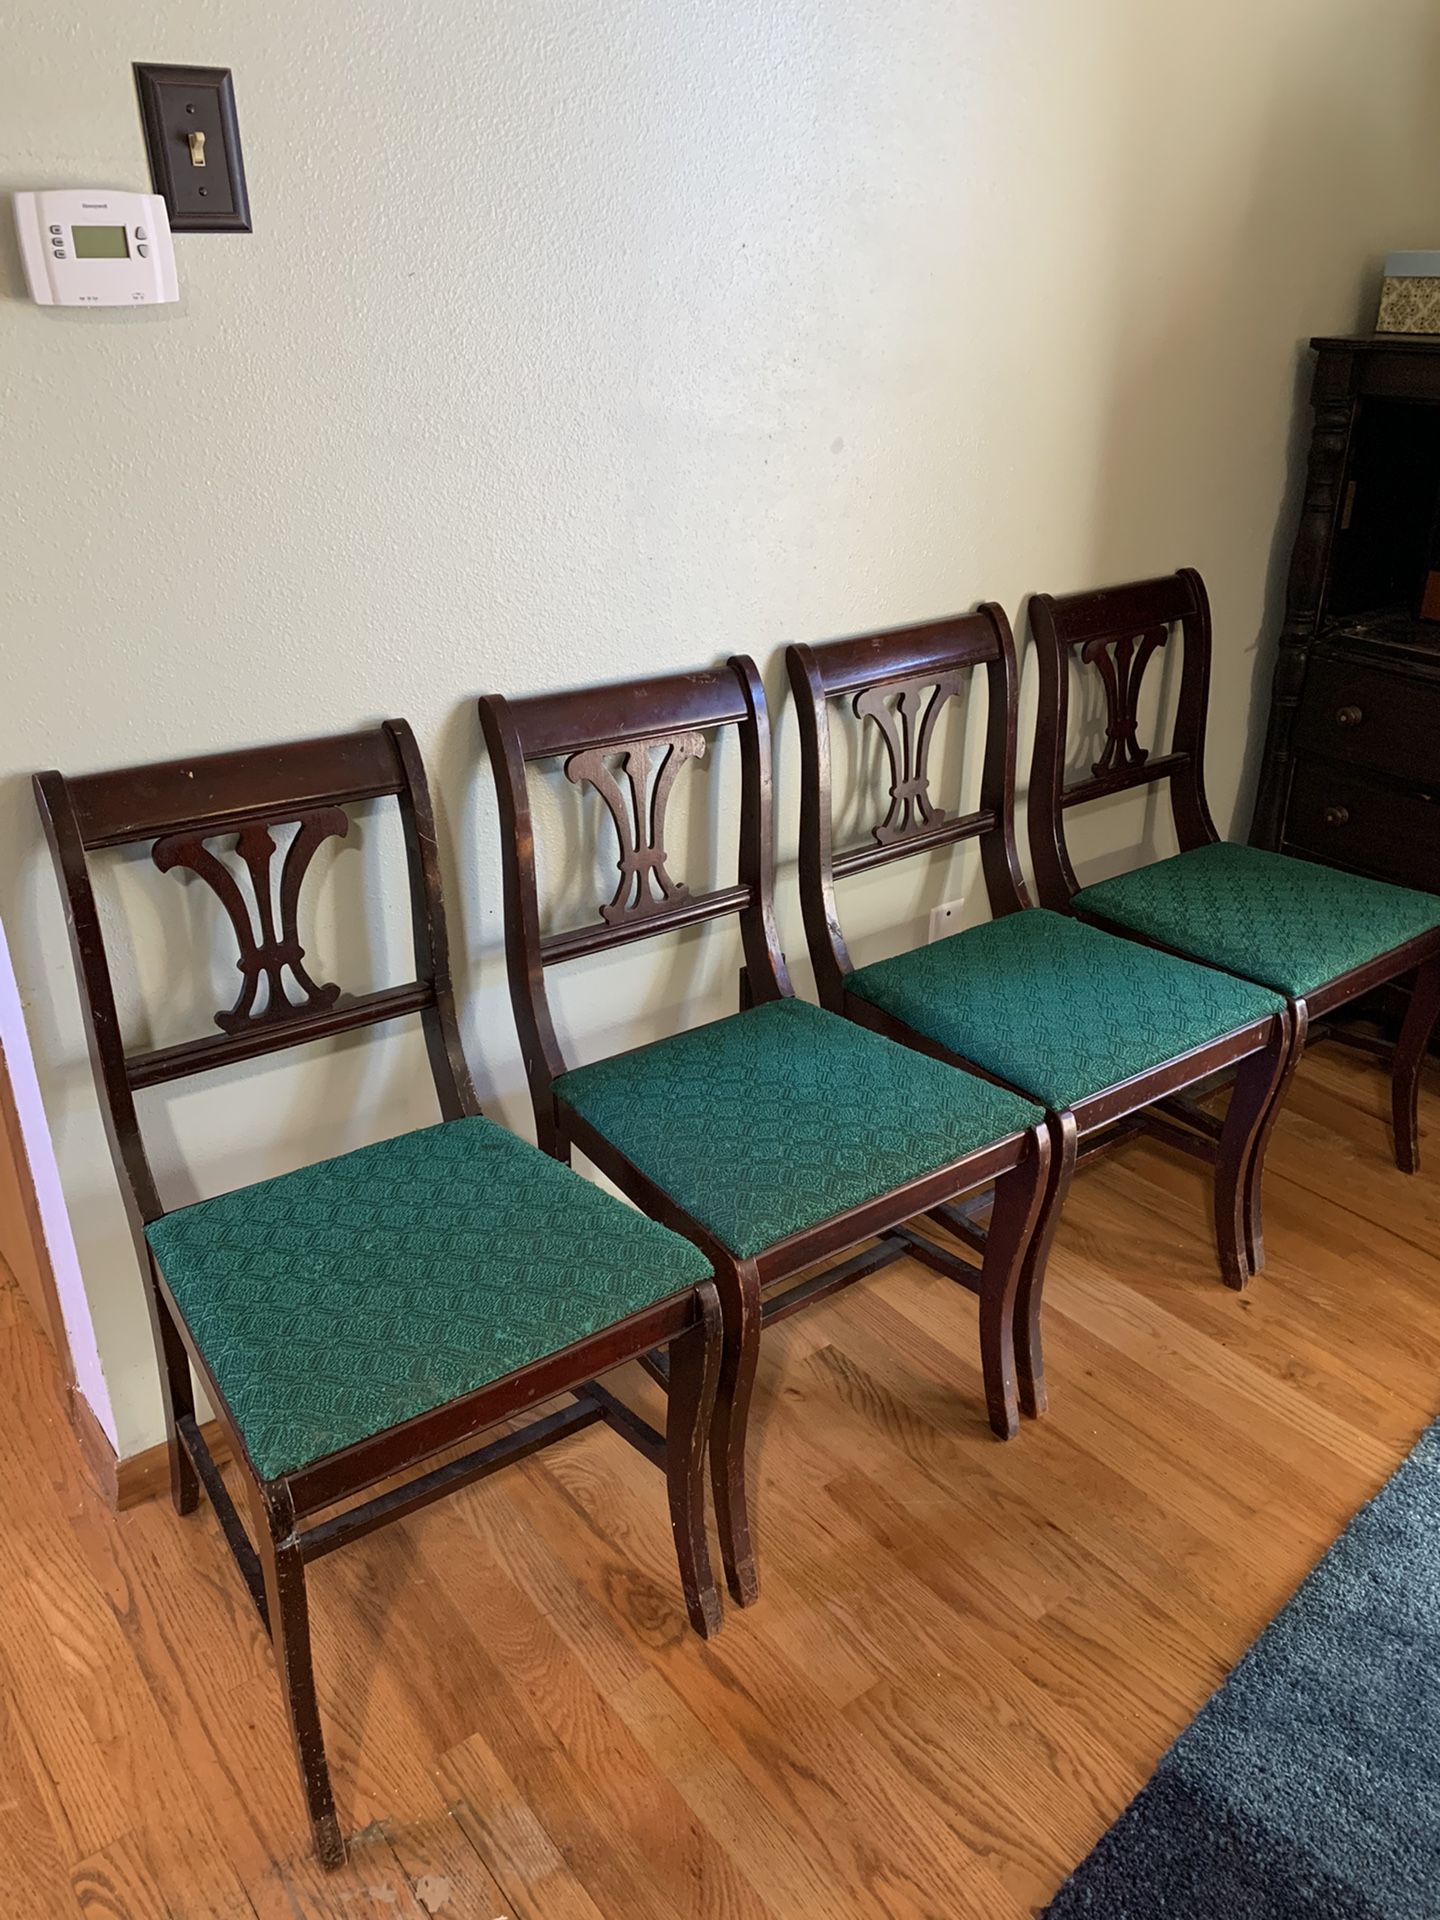 4 Antique Wooden Dining Chairs Retro Vintage!